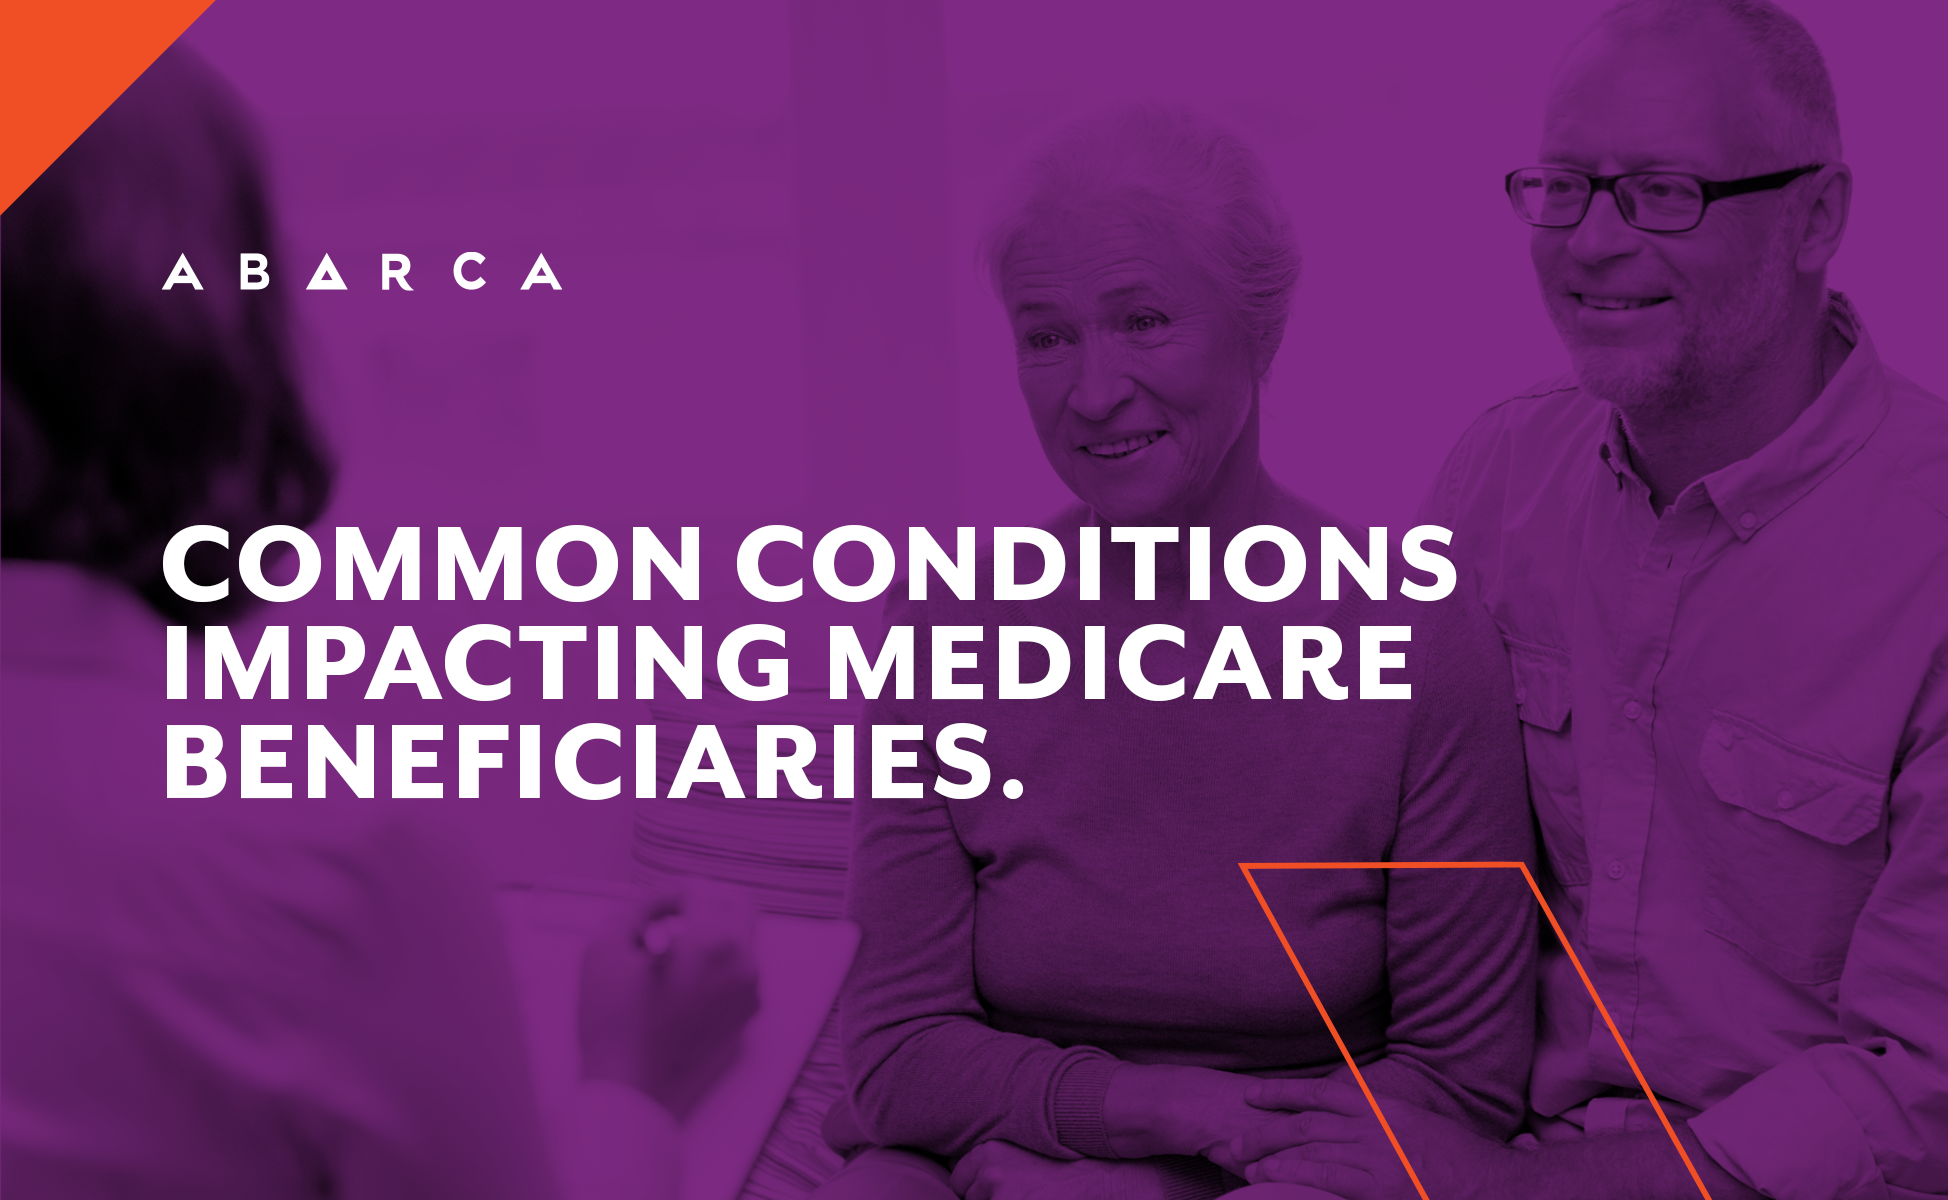 Abarca Health: Common conditions impacting Medicare beneficiaries